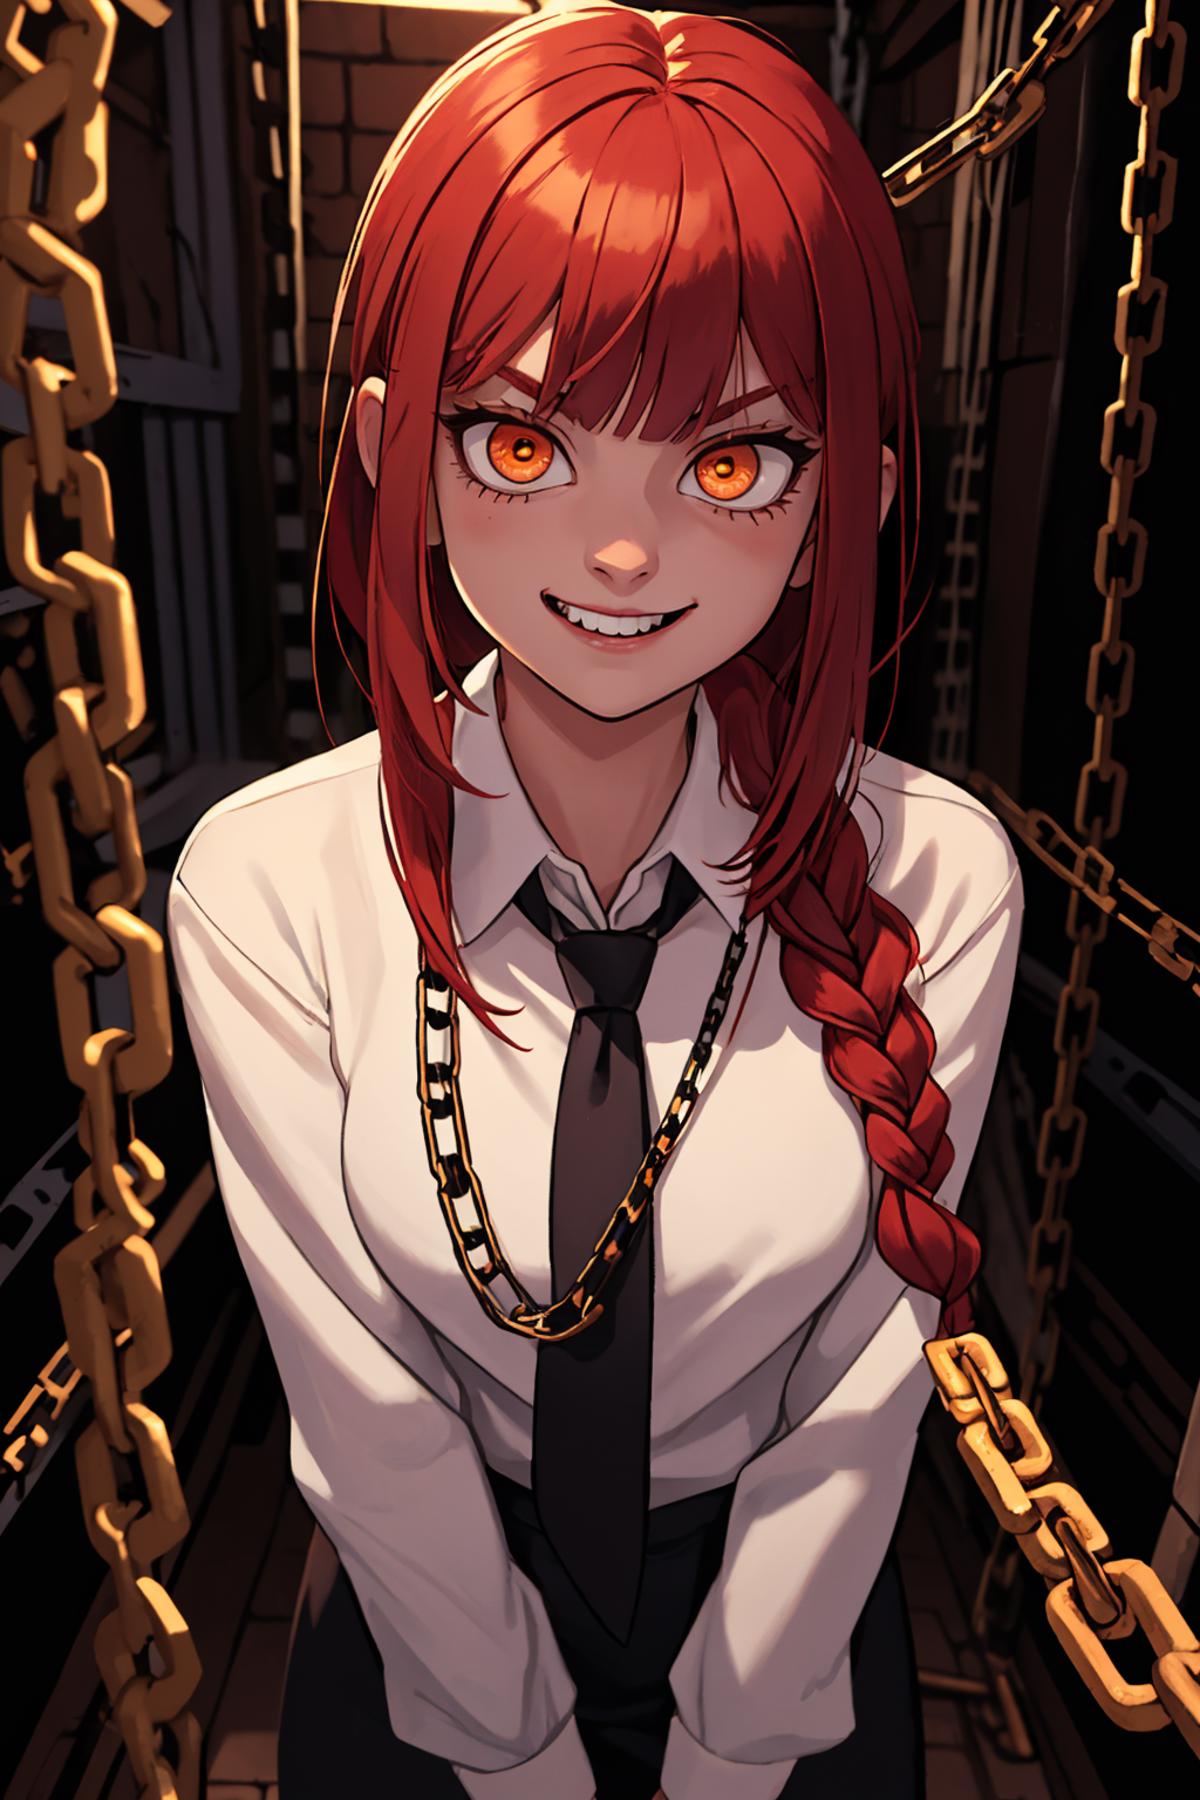 A cartoon girl with red hair and a black tie is smiling.